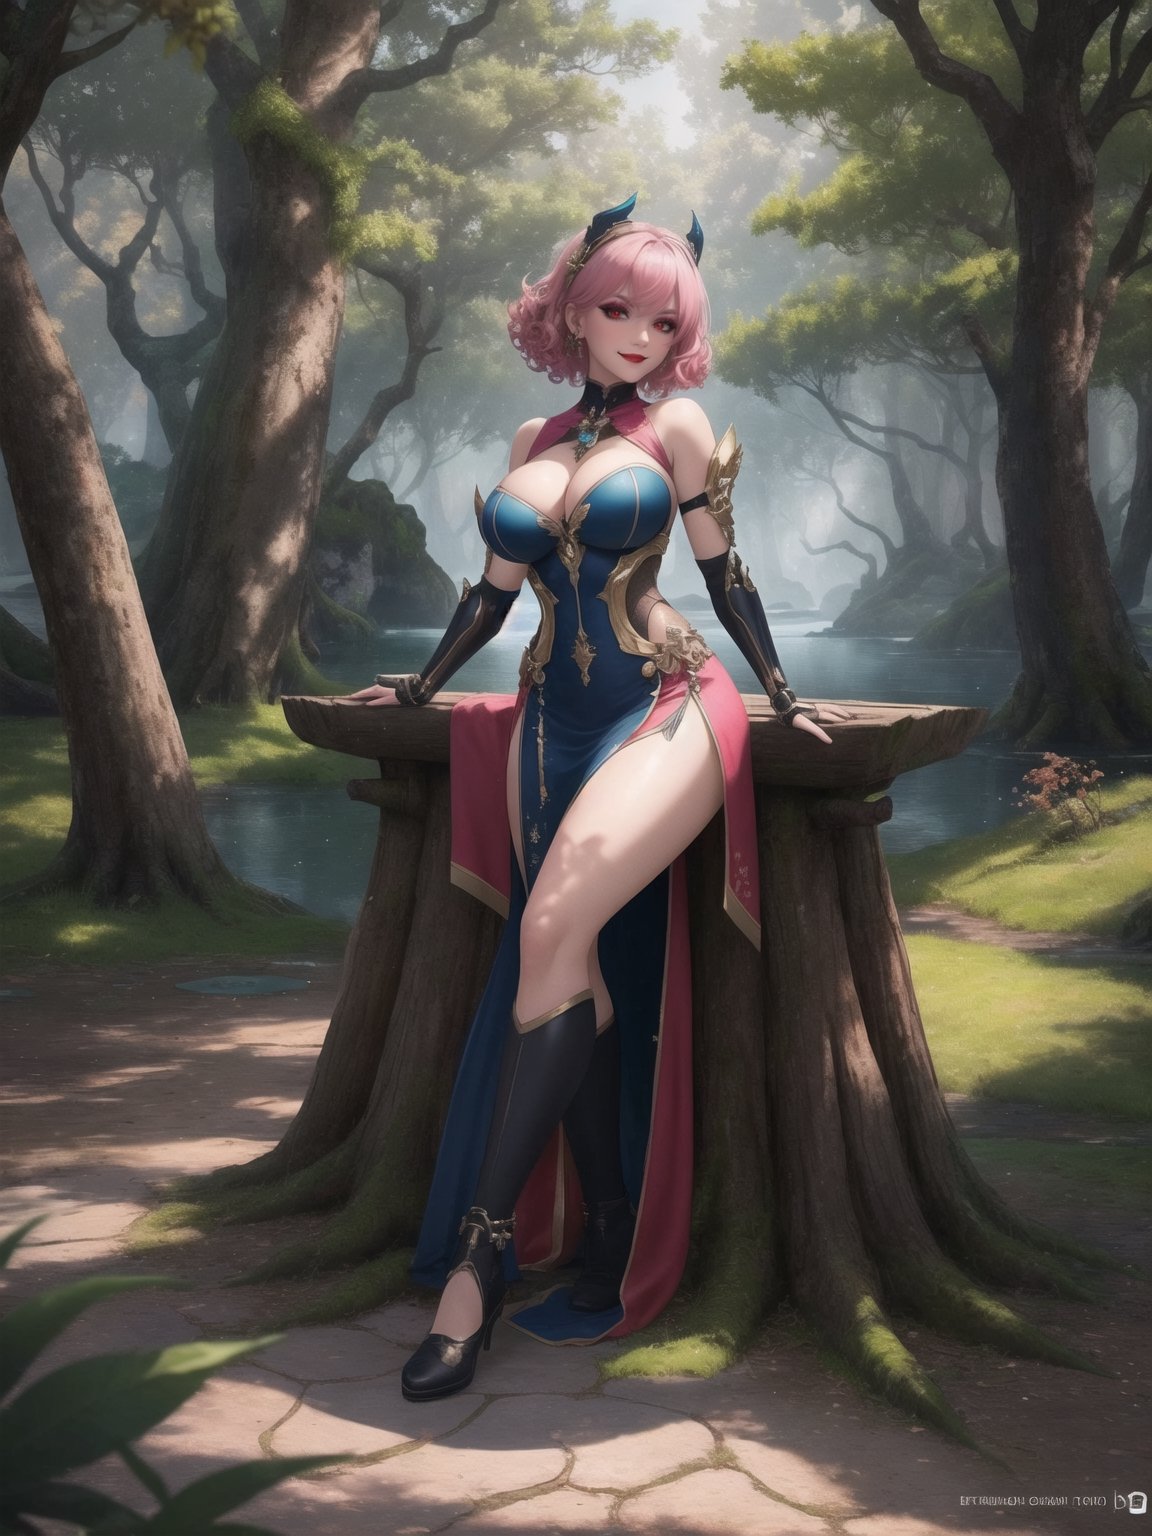 A woman is wearing a white cybernetic suit with blue parts¹[1]. The costume is very tight to the body and she has big breasts. Her hair is short, pink and curly, with bangs that fall over her eyes² [2]. She is looking directly at the viewer. The setting is a magical forest filled with trees and wooden structures, including large tree trunks. It's night and there are several altars with ancient relics scattered around the place, as well as a large lagoon, ((full body)),  UHD, best possible quality, ultra detailed, best possible resolution, ultra technological, Unreal Engine 5, professional photography, she is doing (sensual pose with interaction and leaning on anything) + (object + on something + leaning against), perfect, More detail,